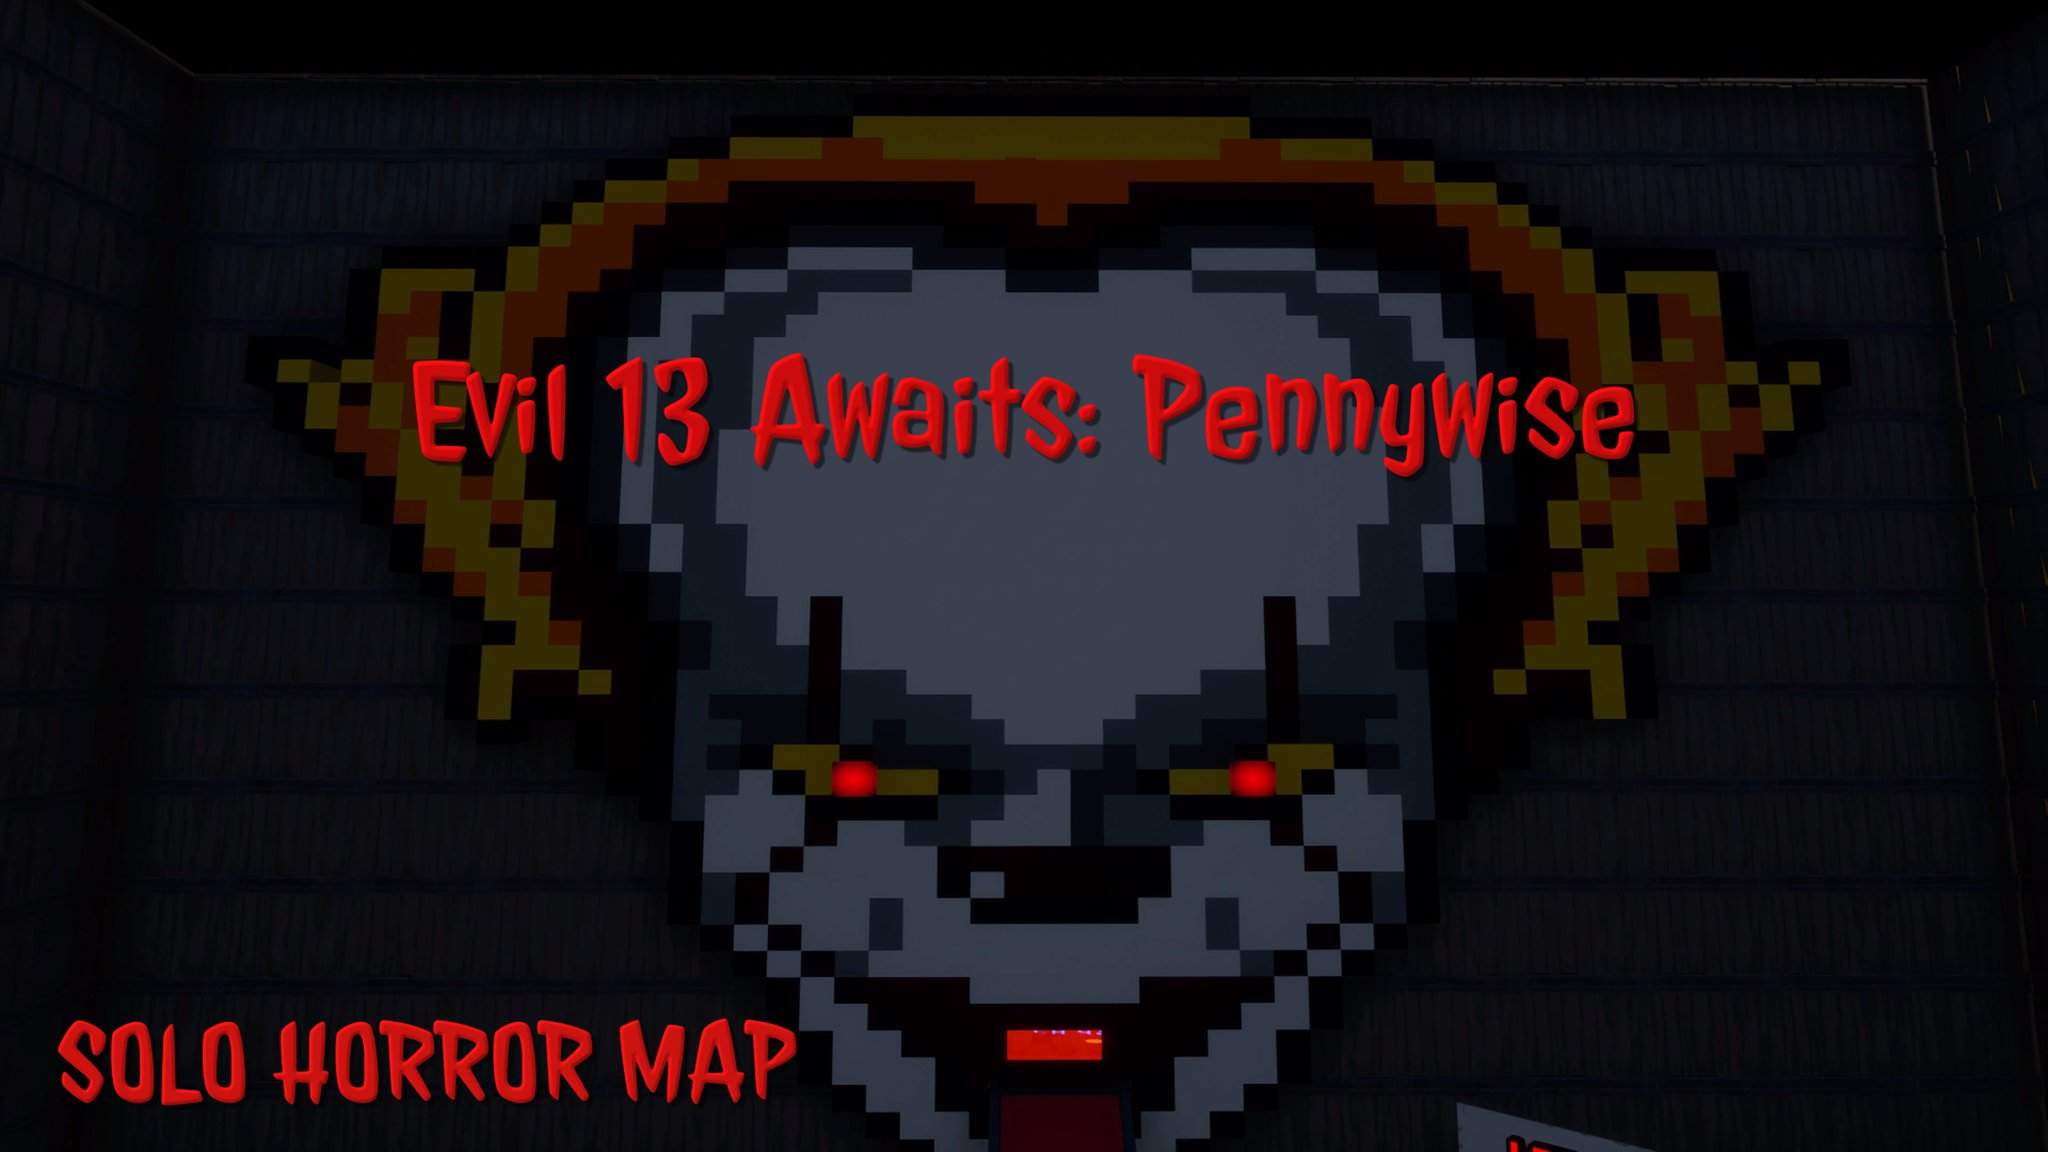 EVIL 13 AWAITS: PENNYWISE